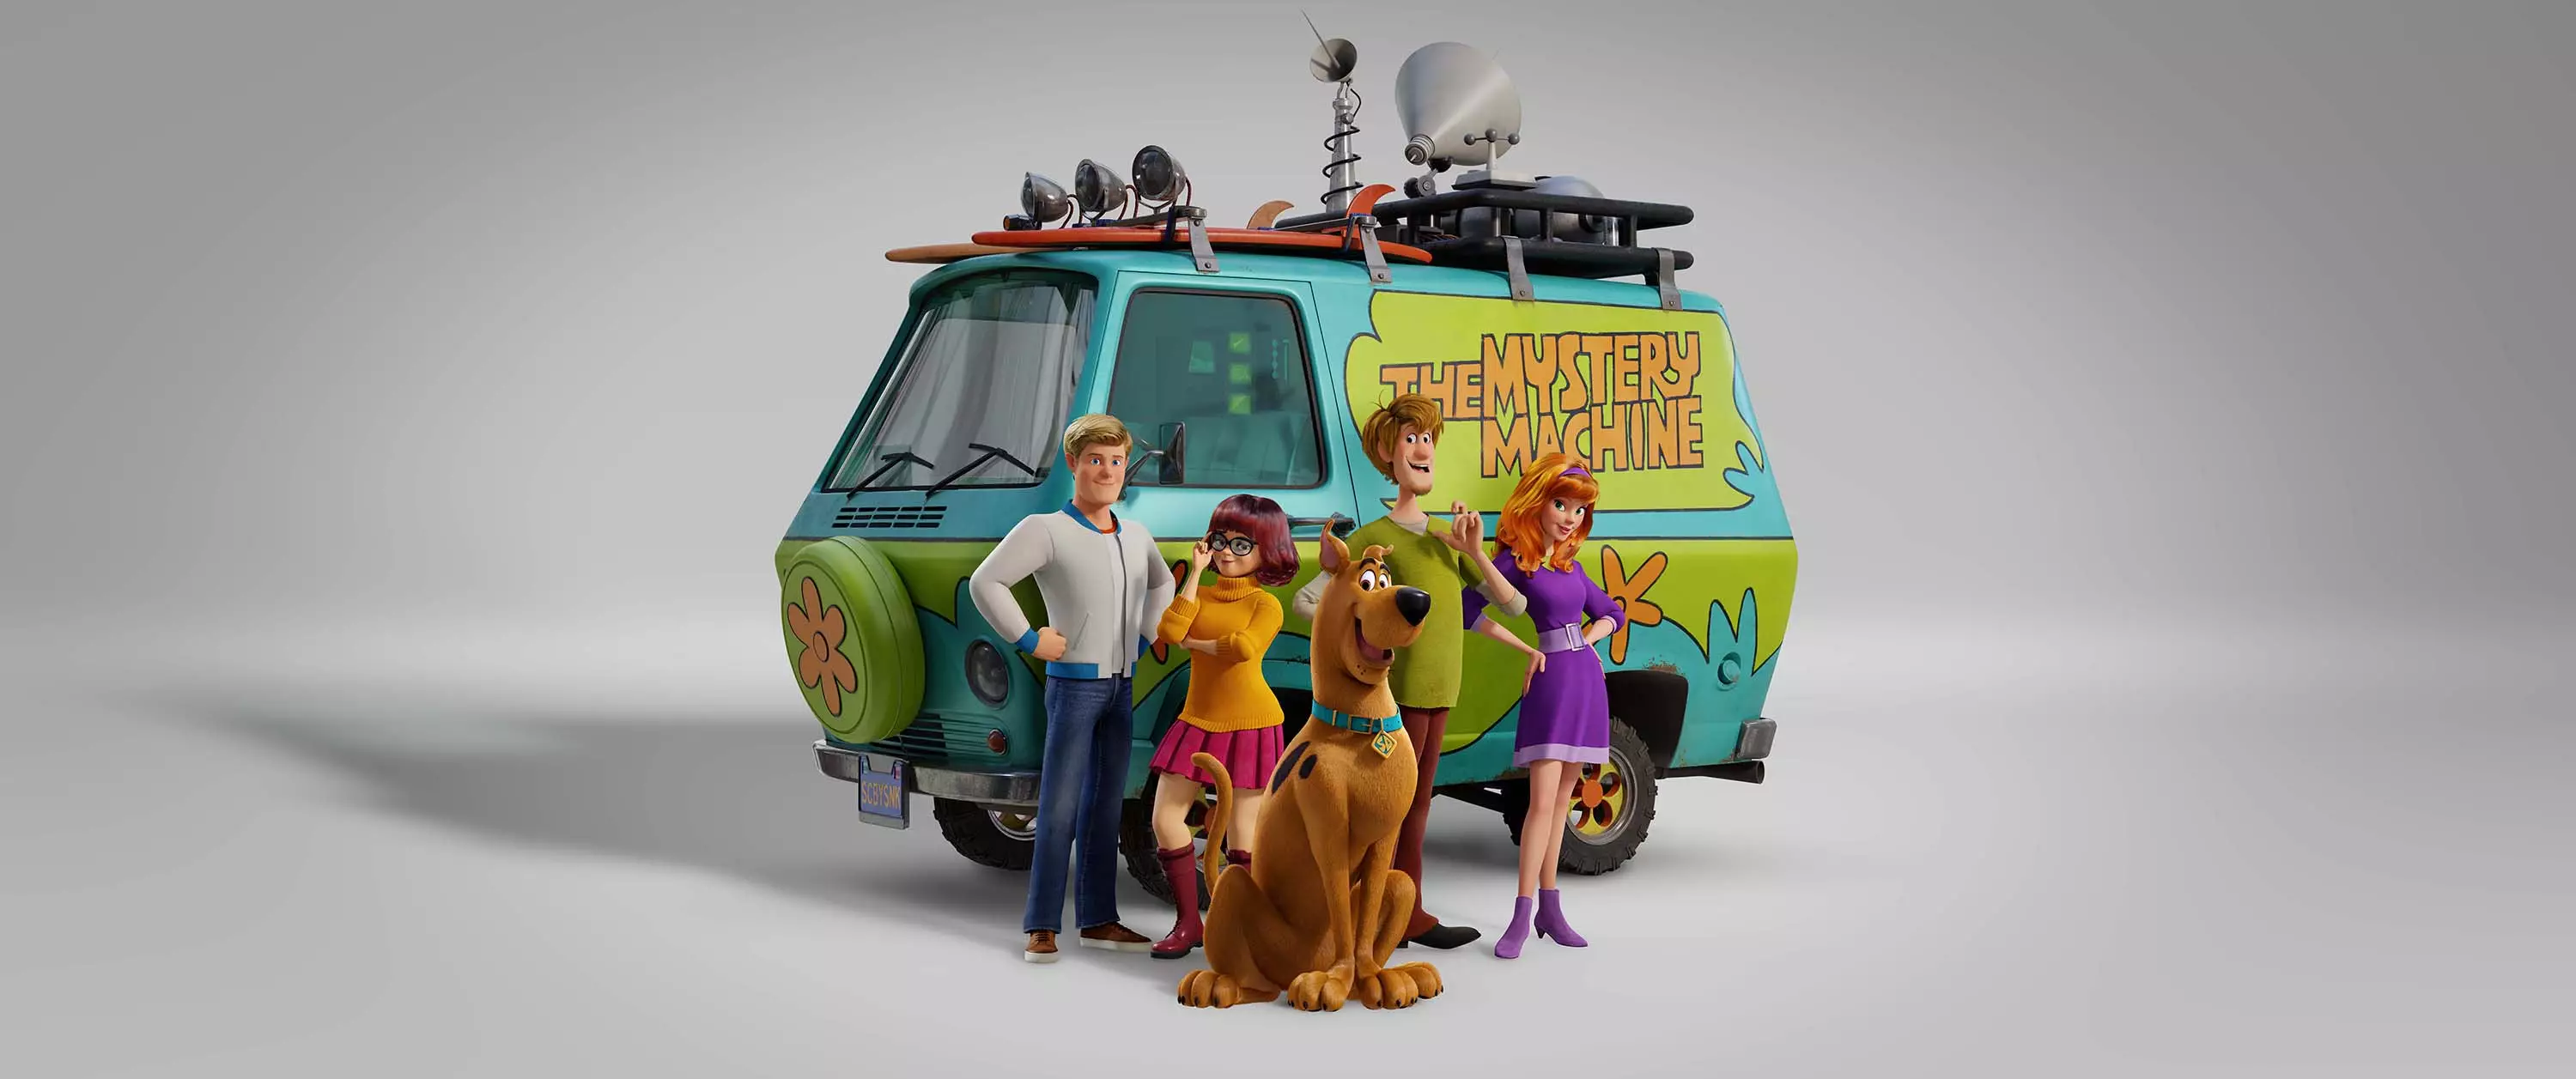 Fred, Velma, Daphne, Shaggy and Scooby appear in the new 3D animated flick (